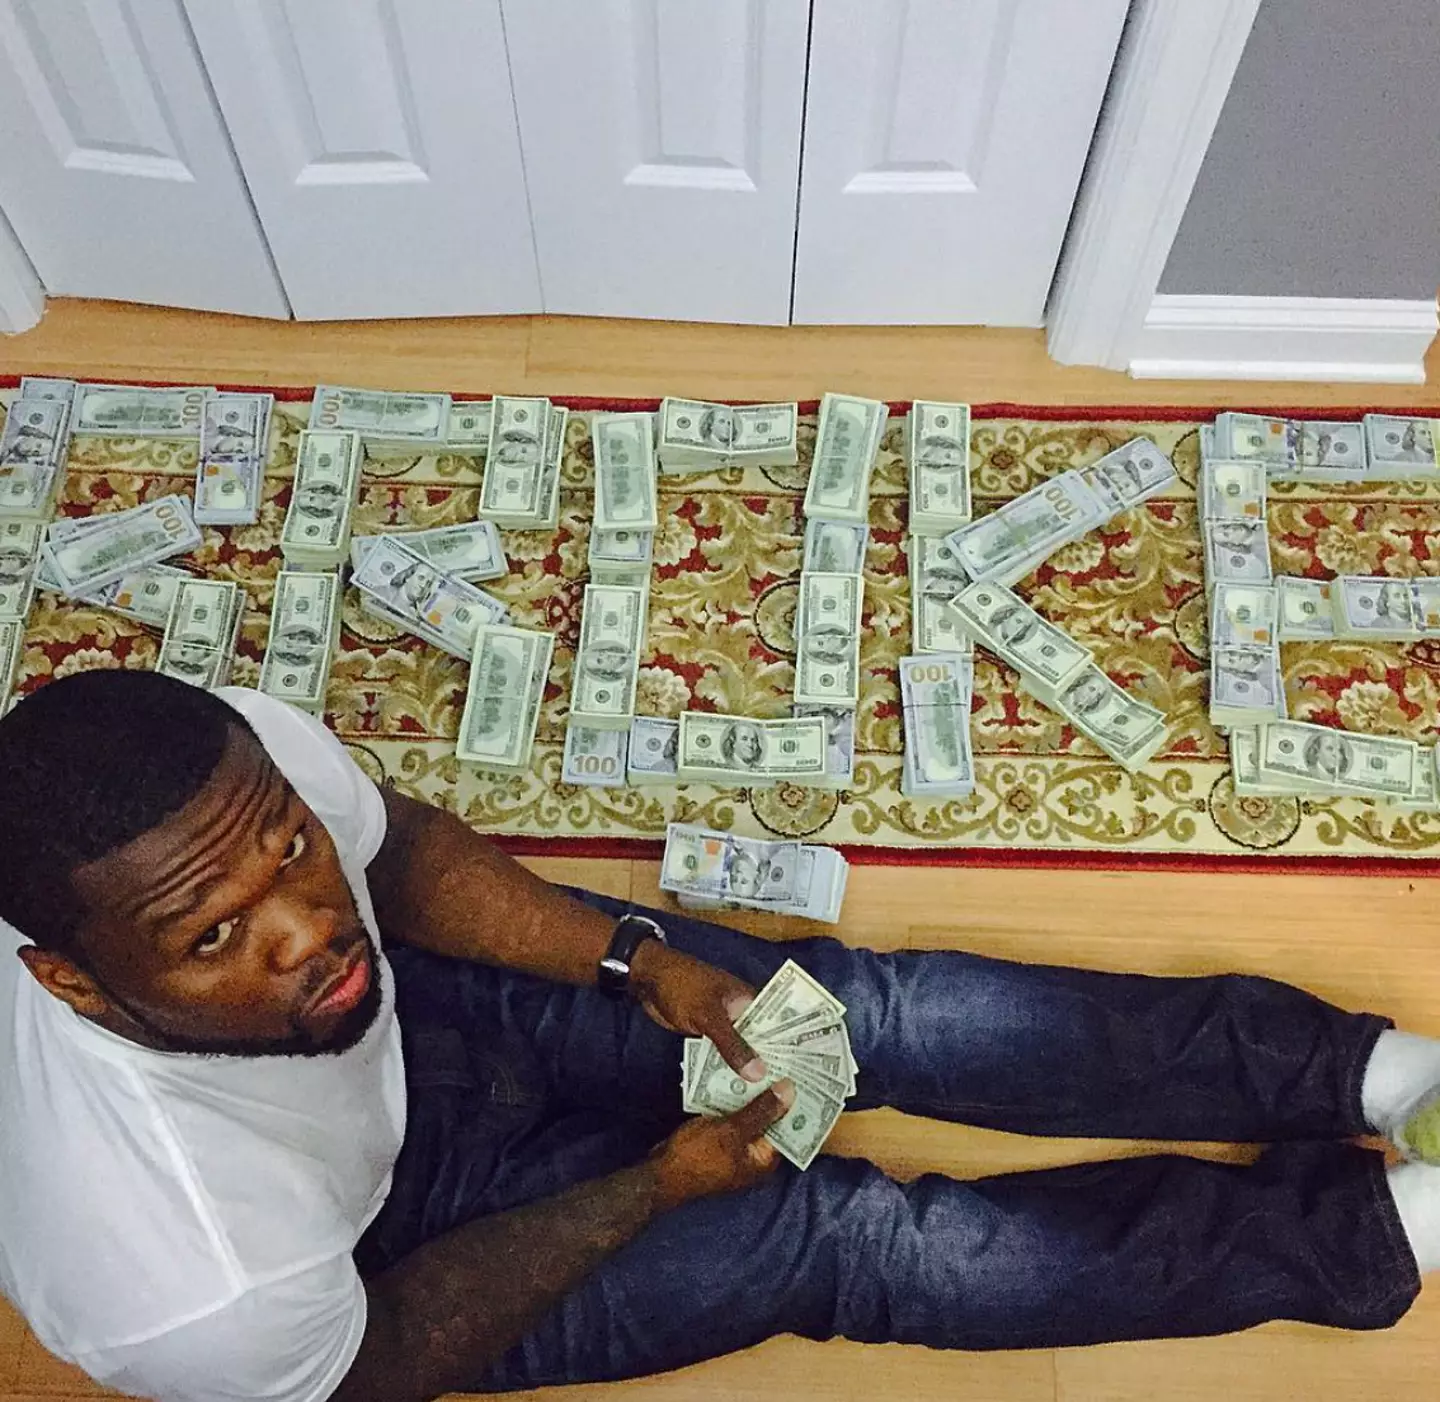 It also appeared to reference a 2016 Instagram photo shared by 50 Cent after the rapper filed for bankruptcy.